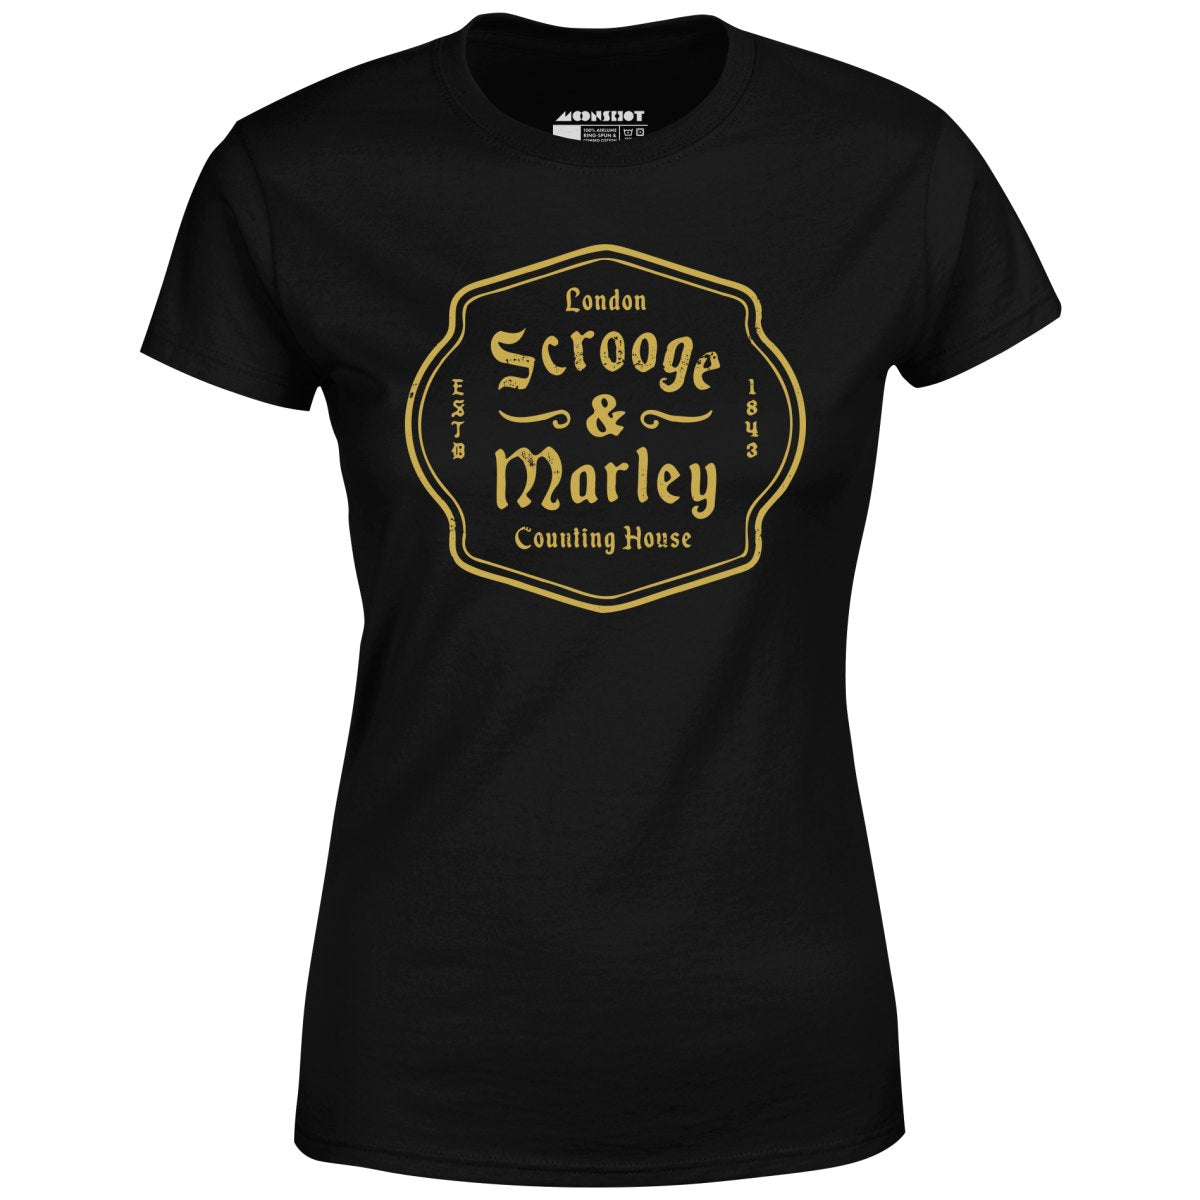 Scrooge & Marley Counting House - Women's T-Shirt